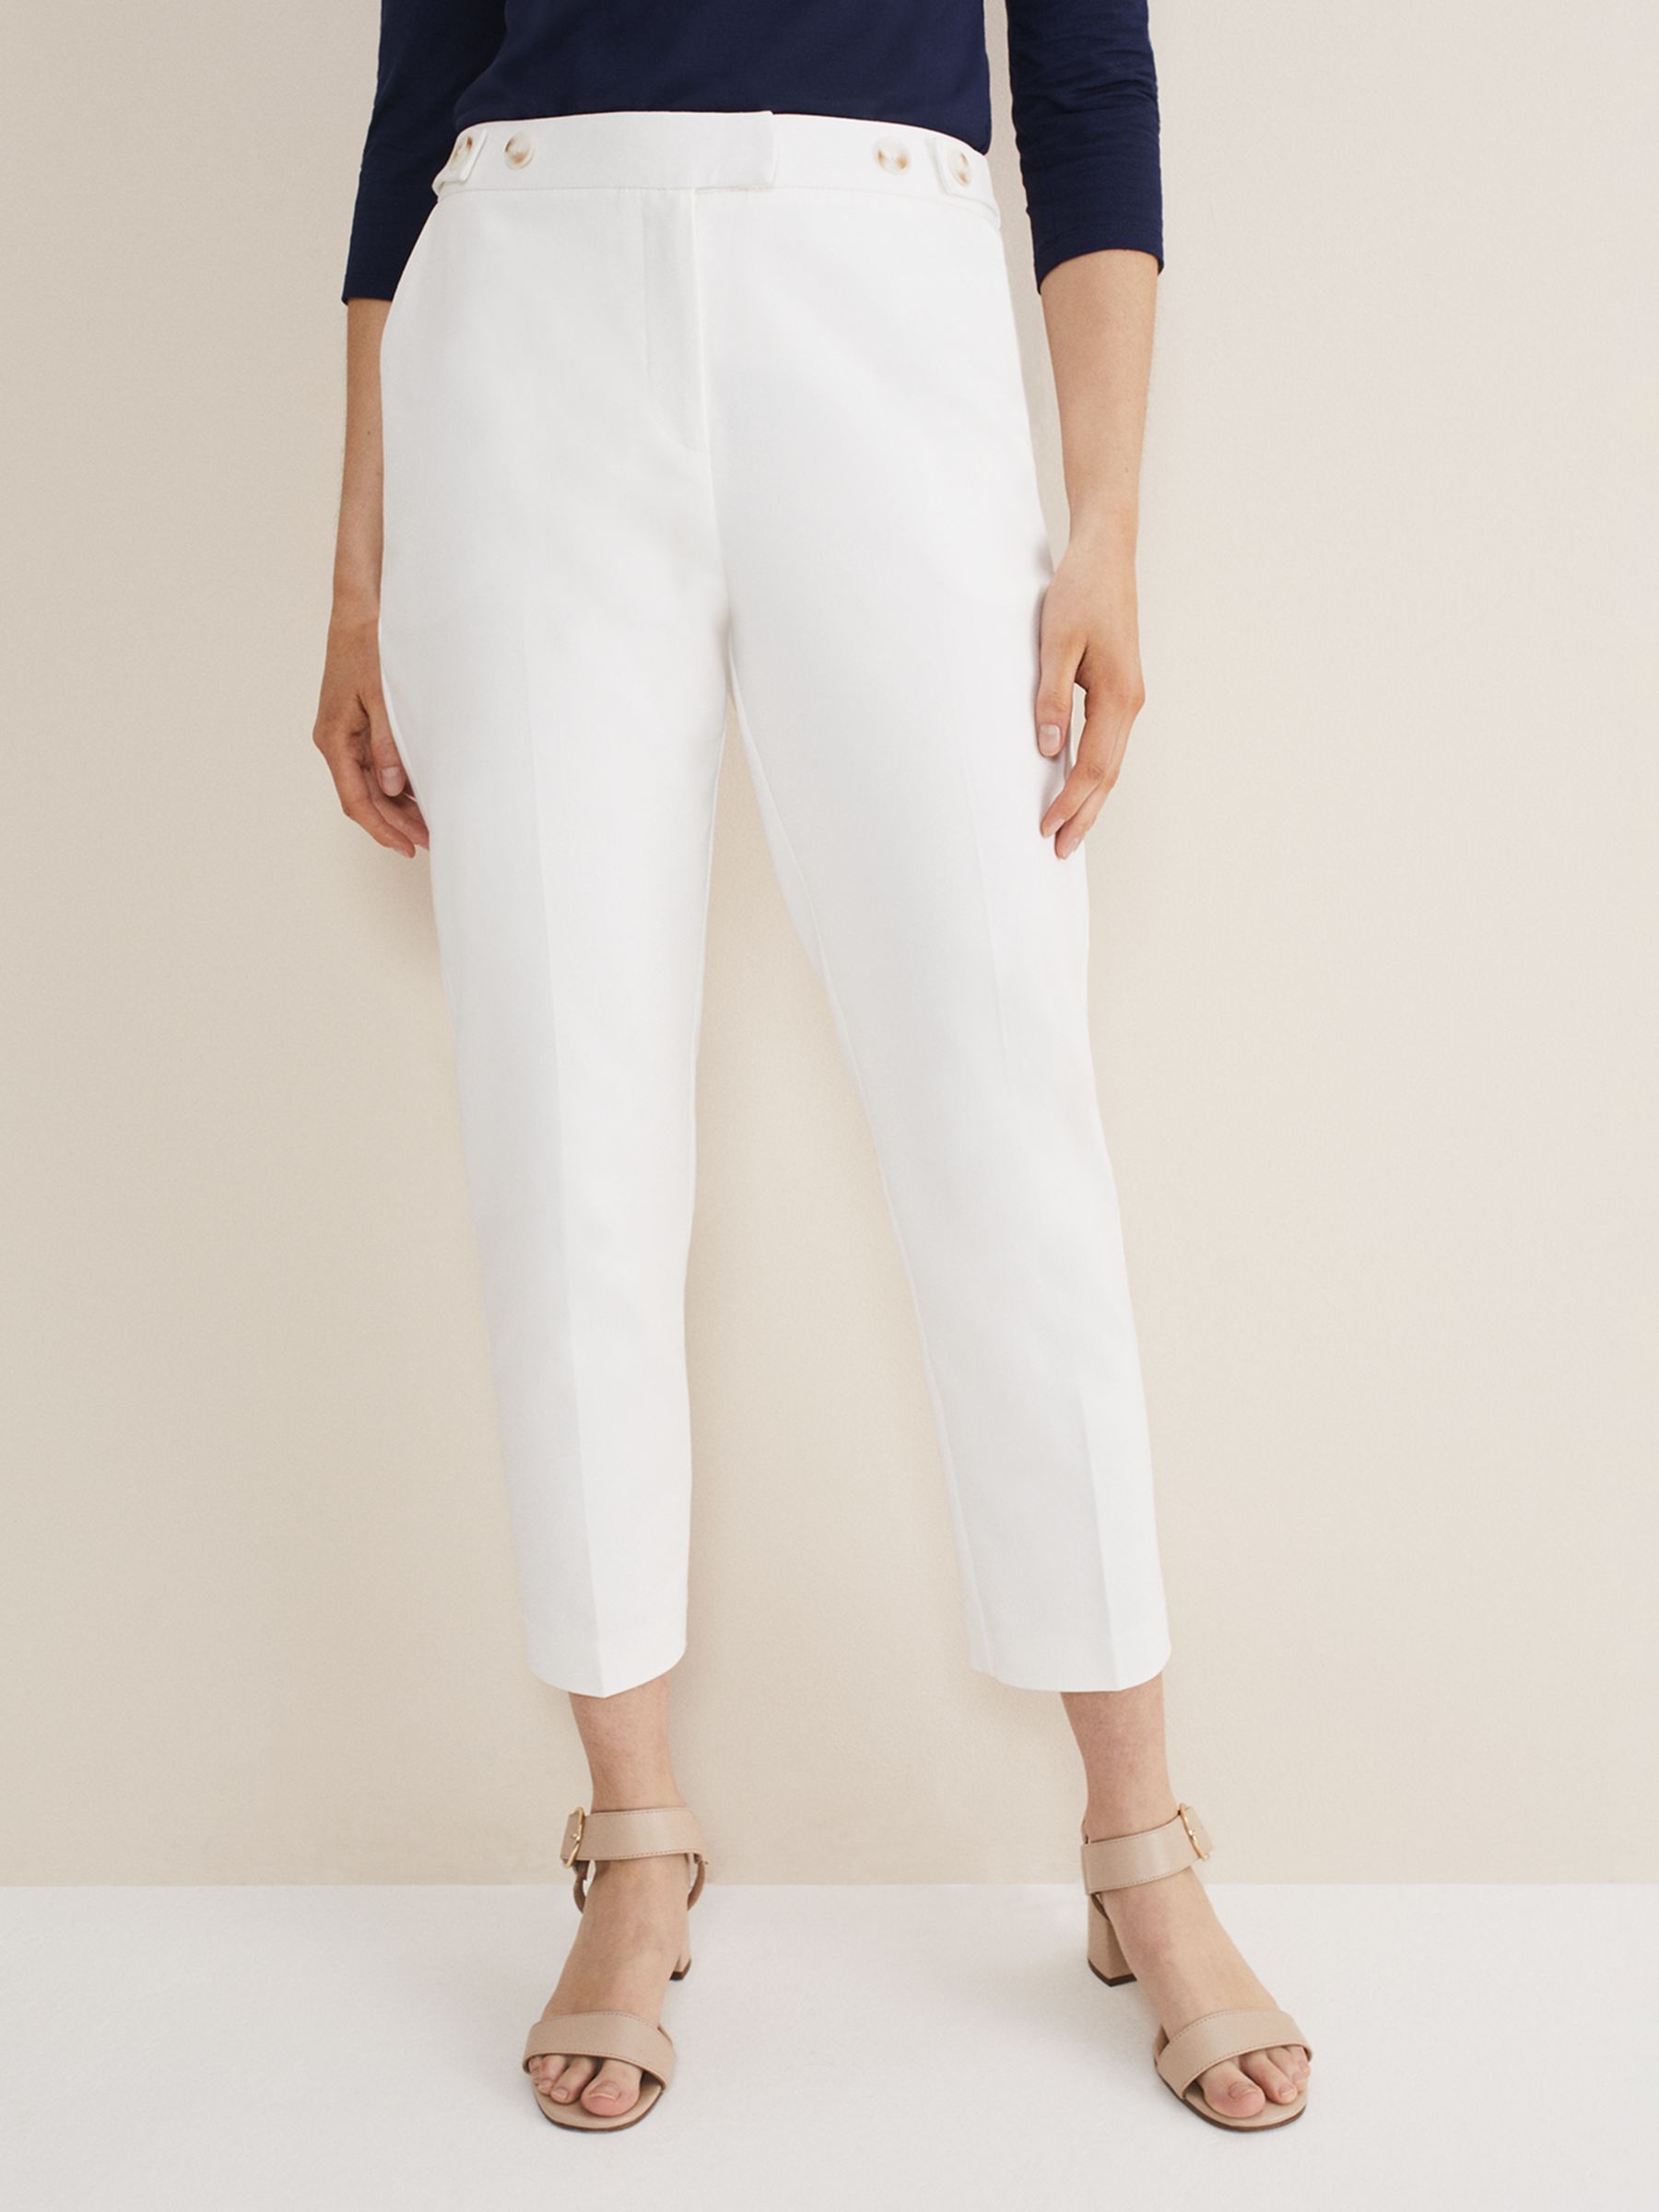 Phase Eight Ulrica Ankle Grazer Trousers, White at John Lewis & Partners